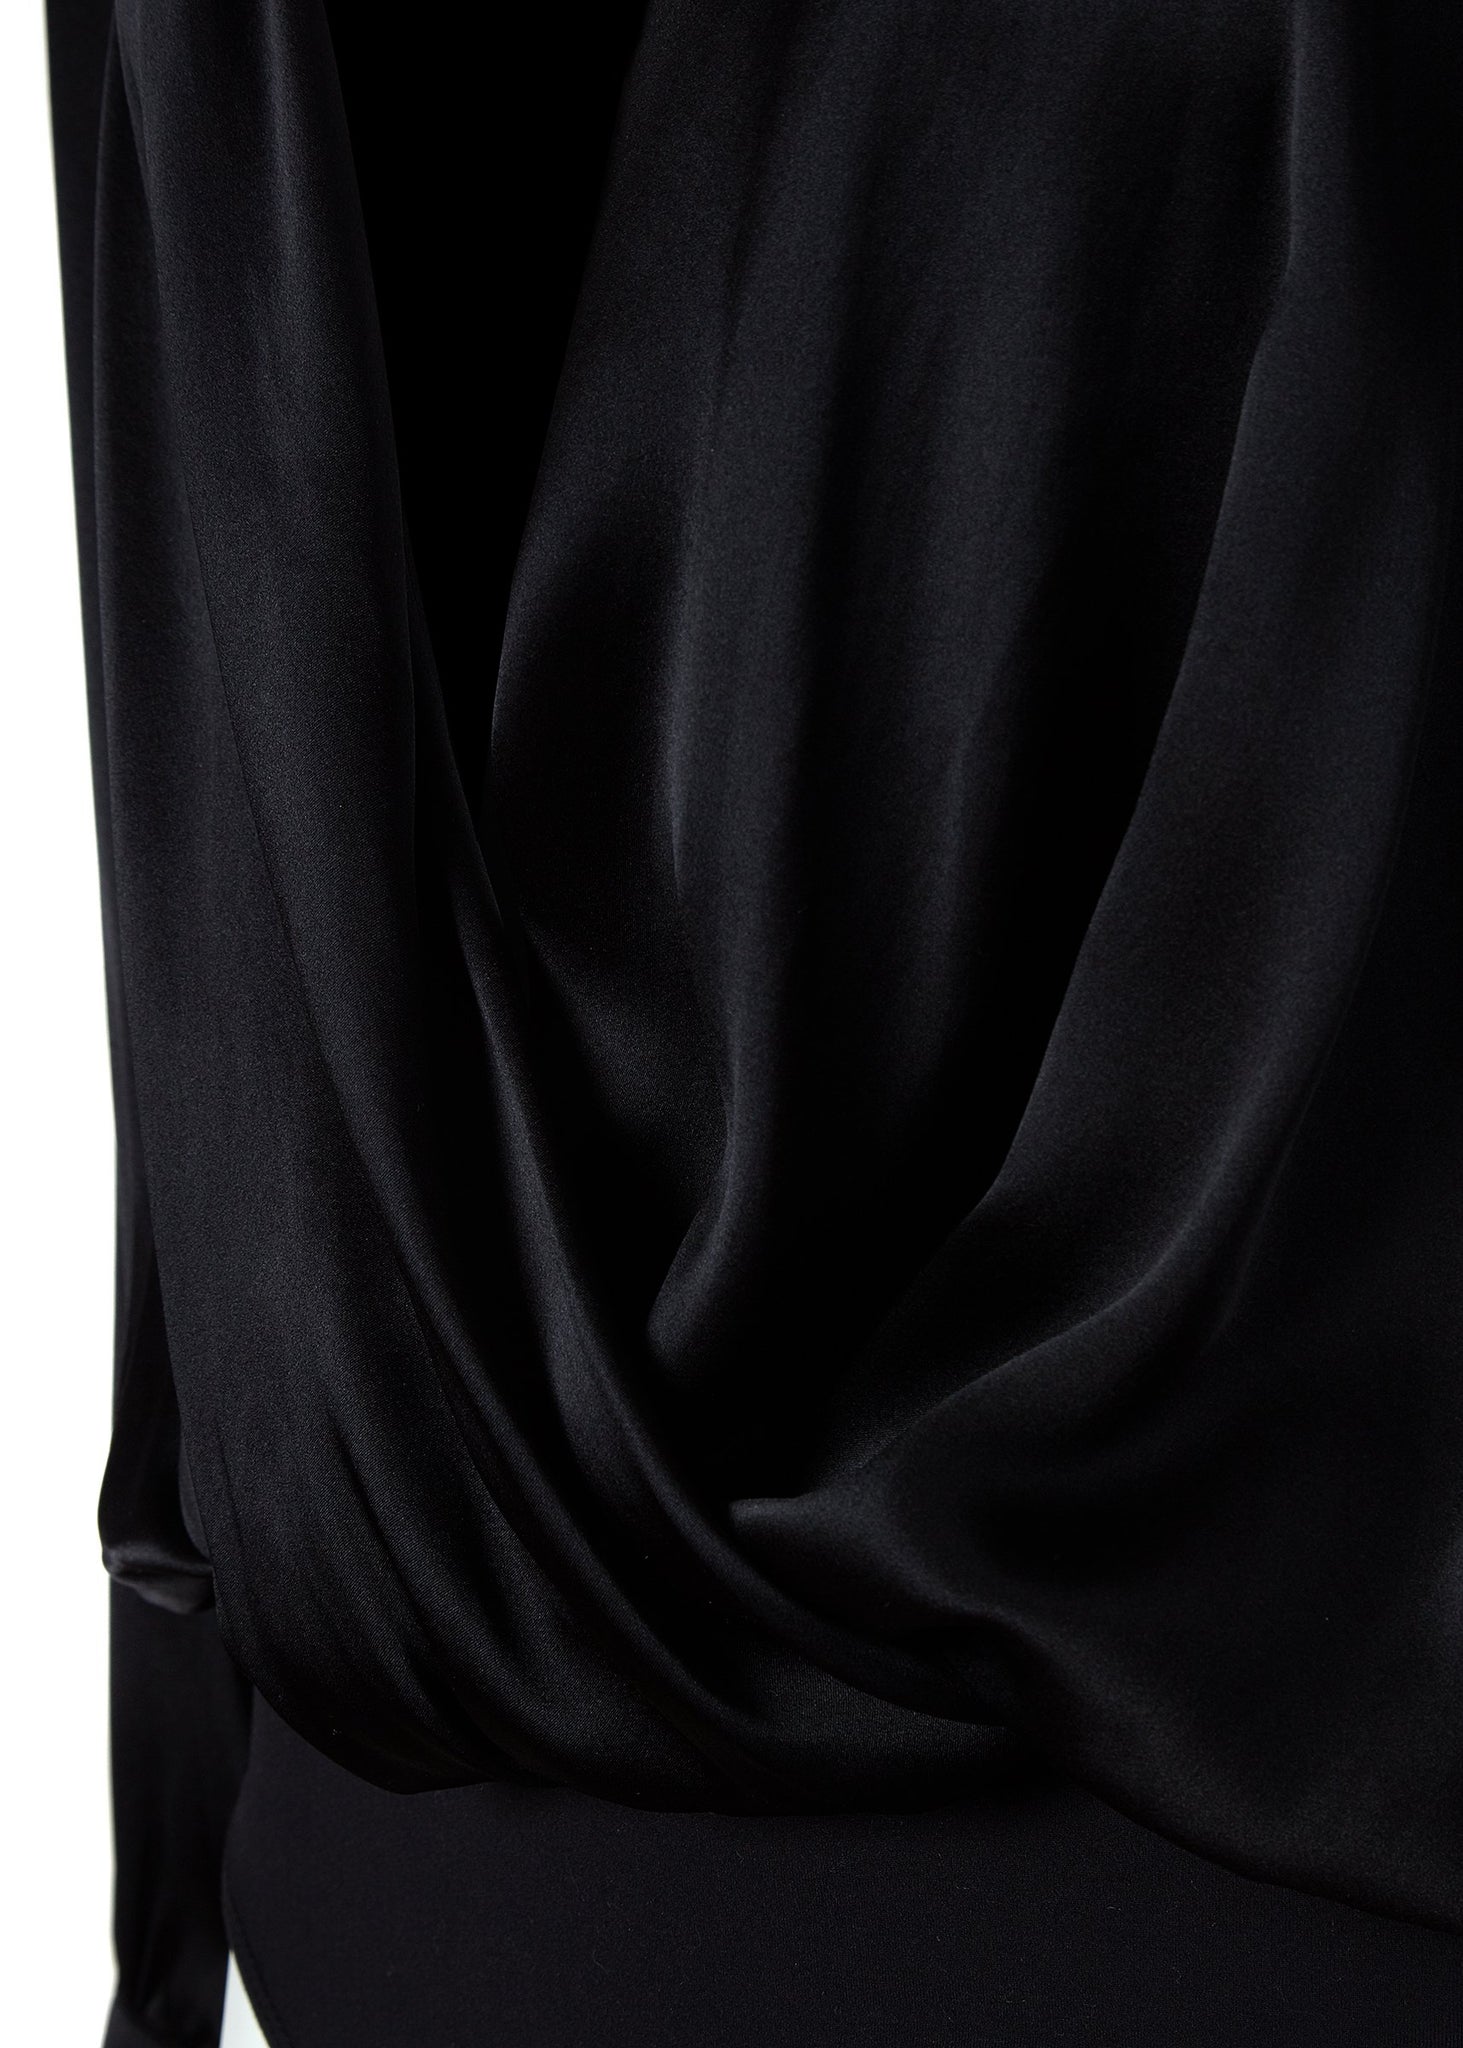 wrap detail on womens long sleeve silk black wrap front bodysuit with gold buttons